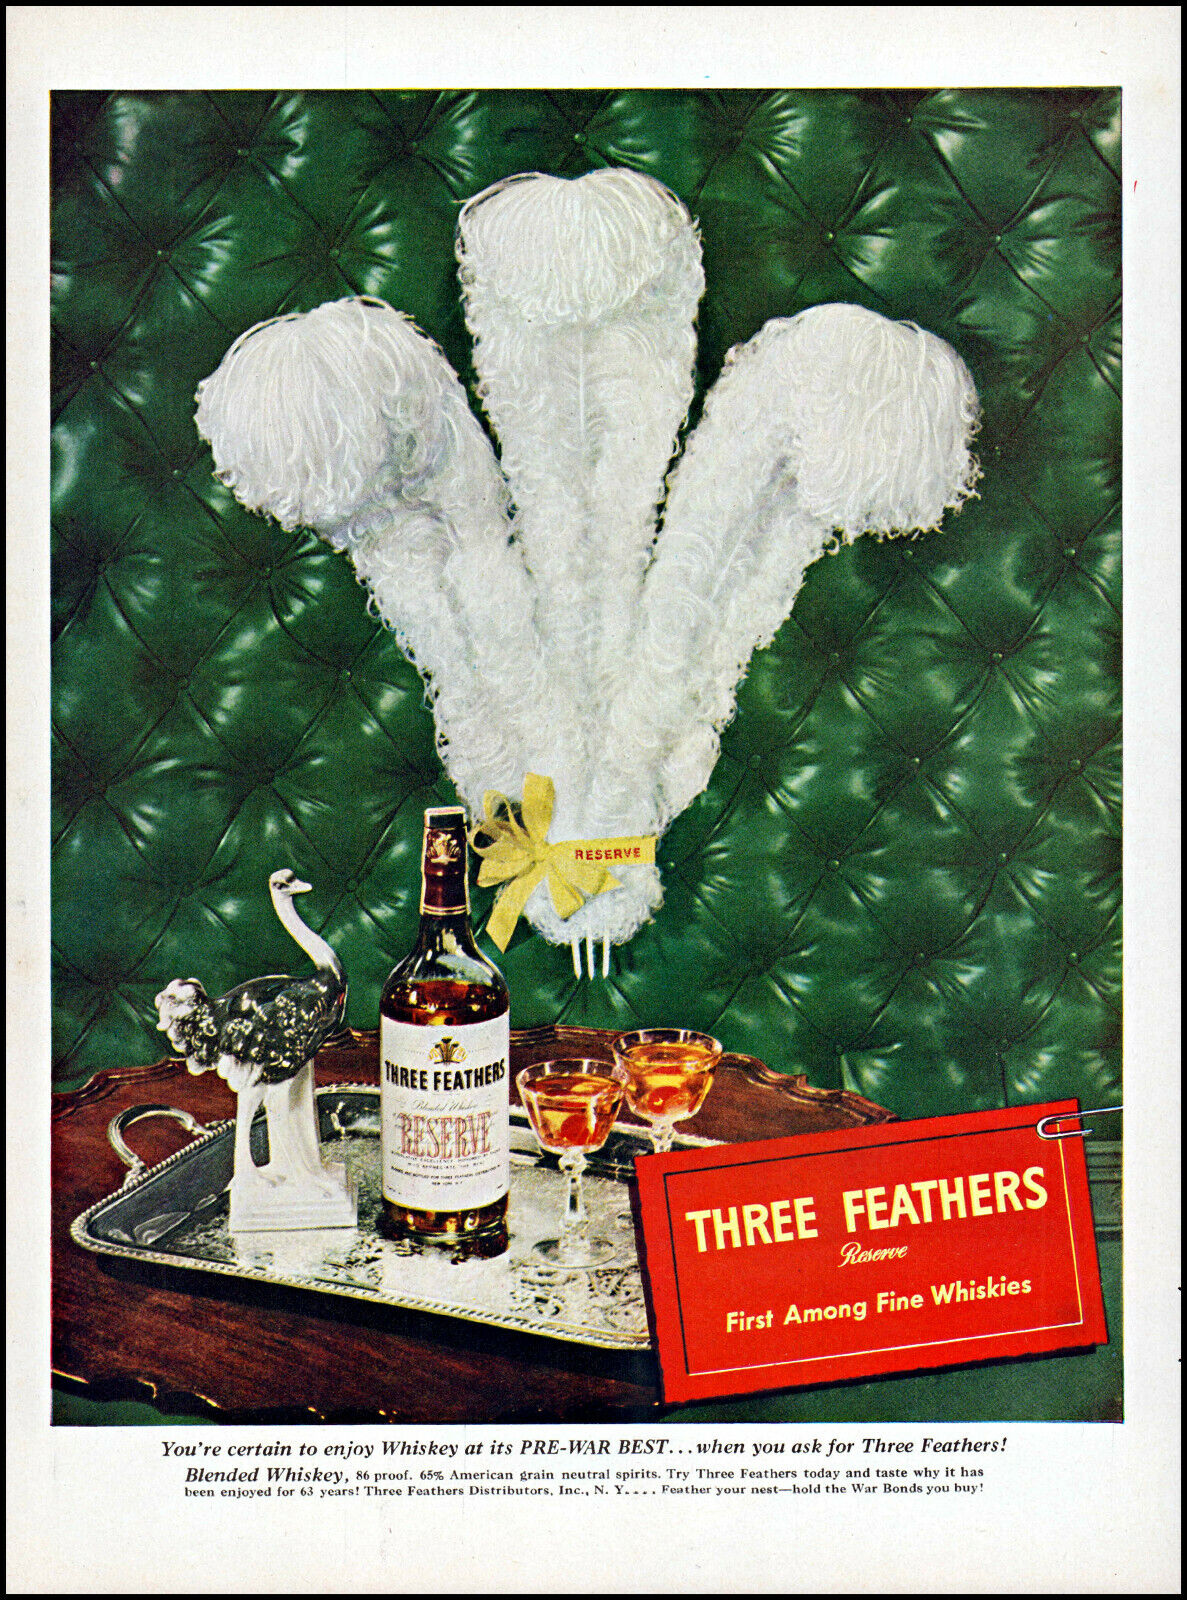 1945 Three Feathers Reserve Whiskey pre ww2 best vintage photo print Ad adL52